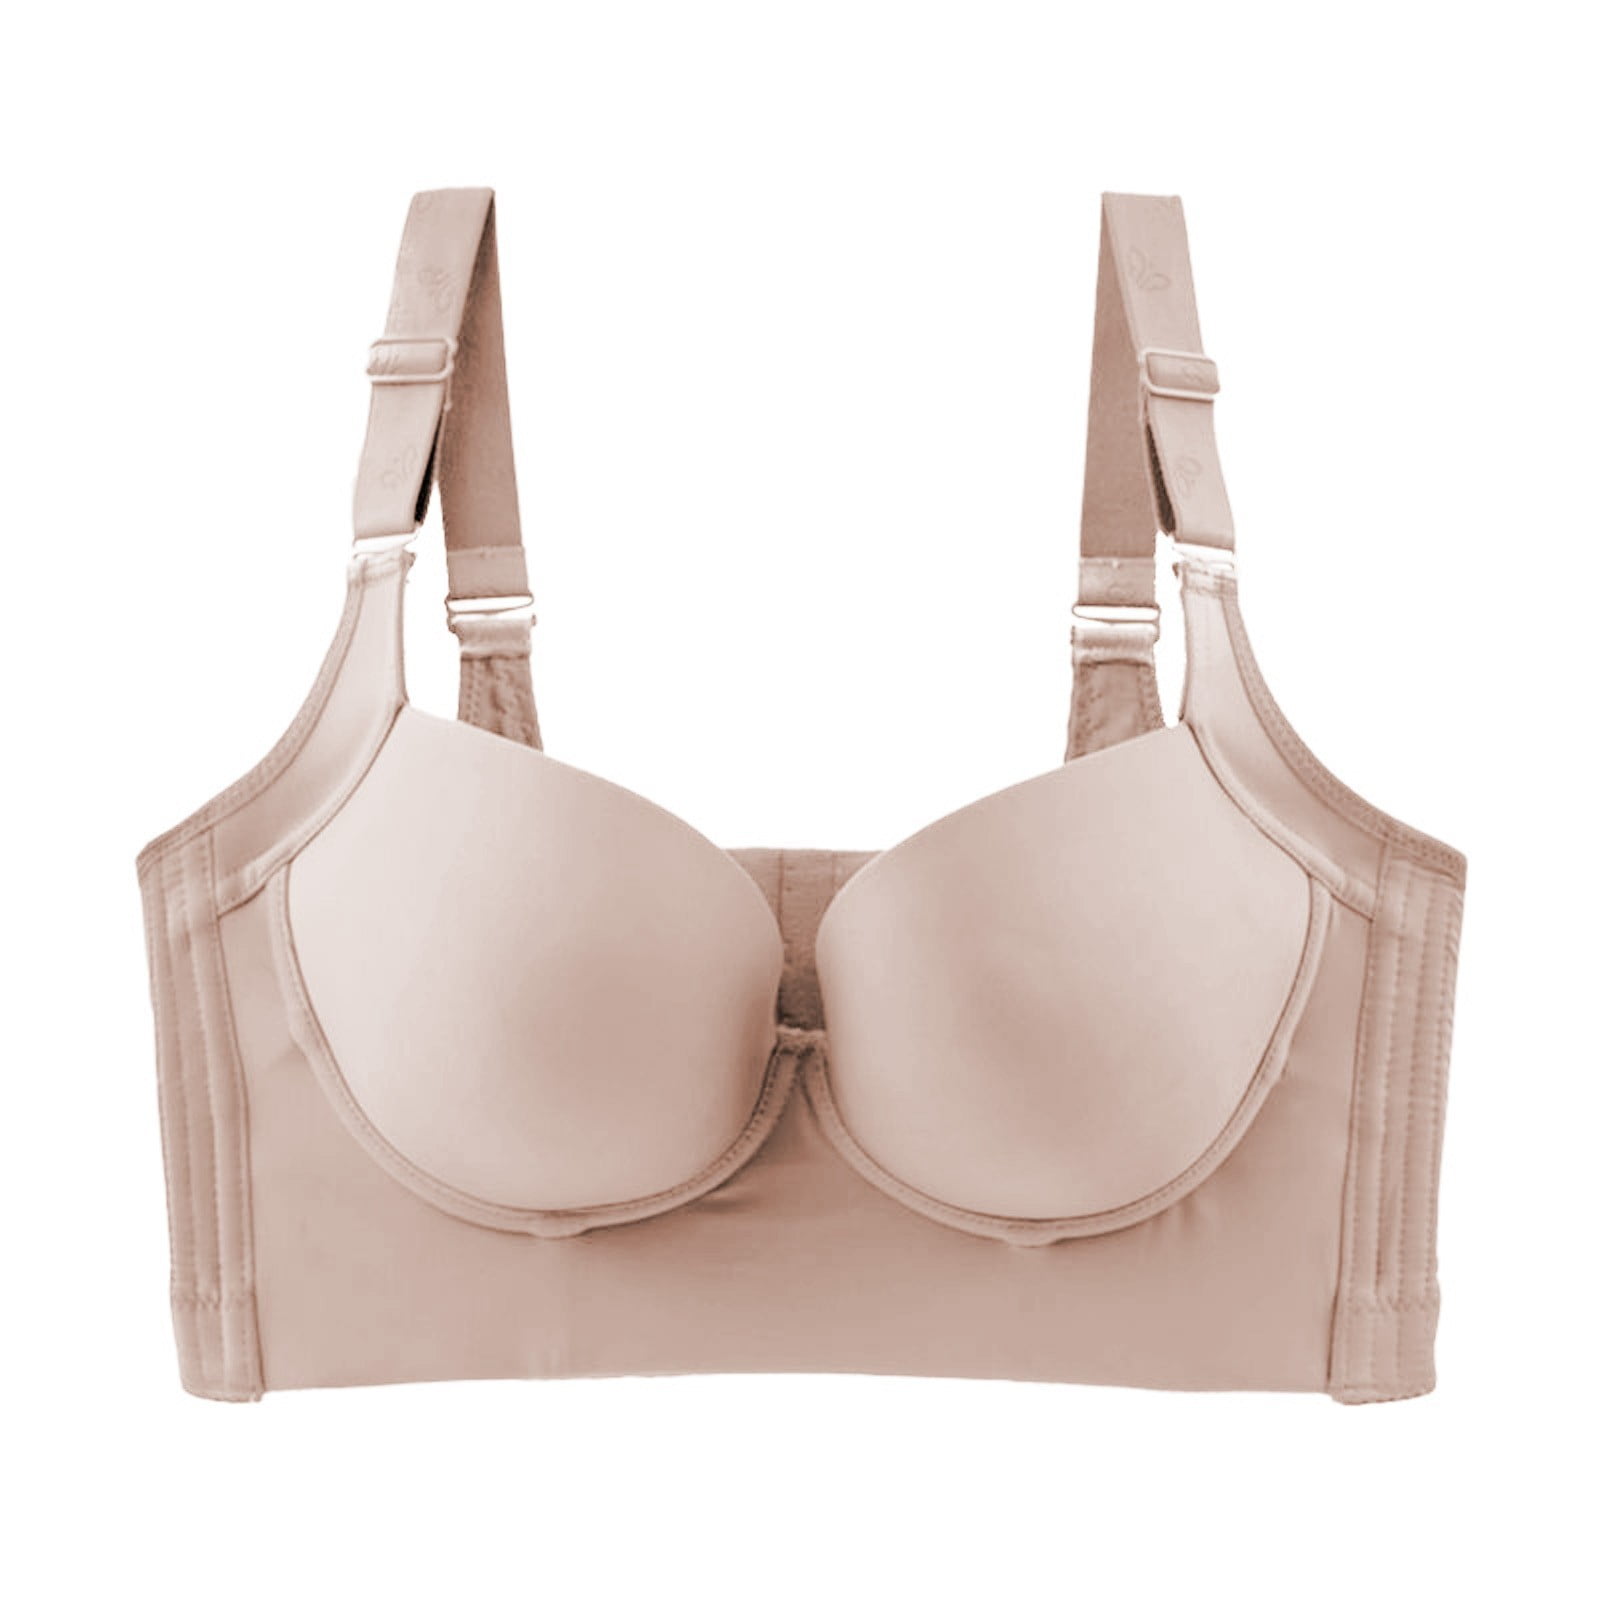 Cup Bra Large Size Lingerie Bra at best price in Shillong by